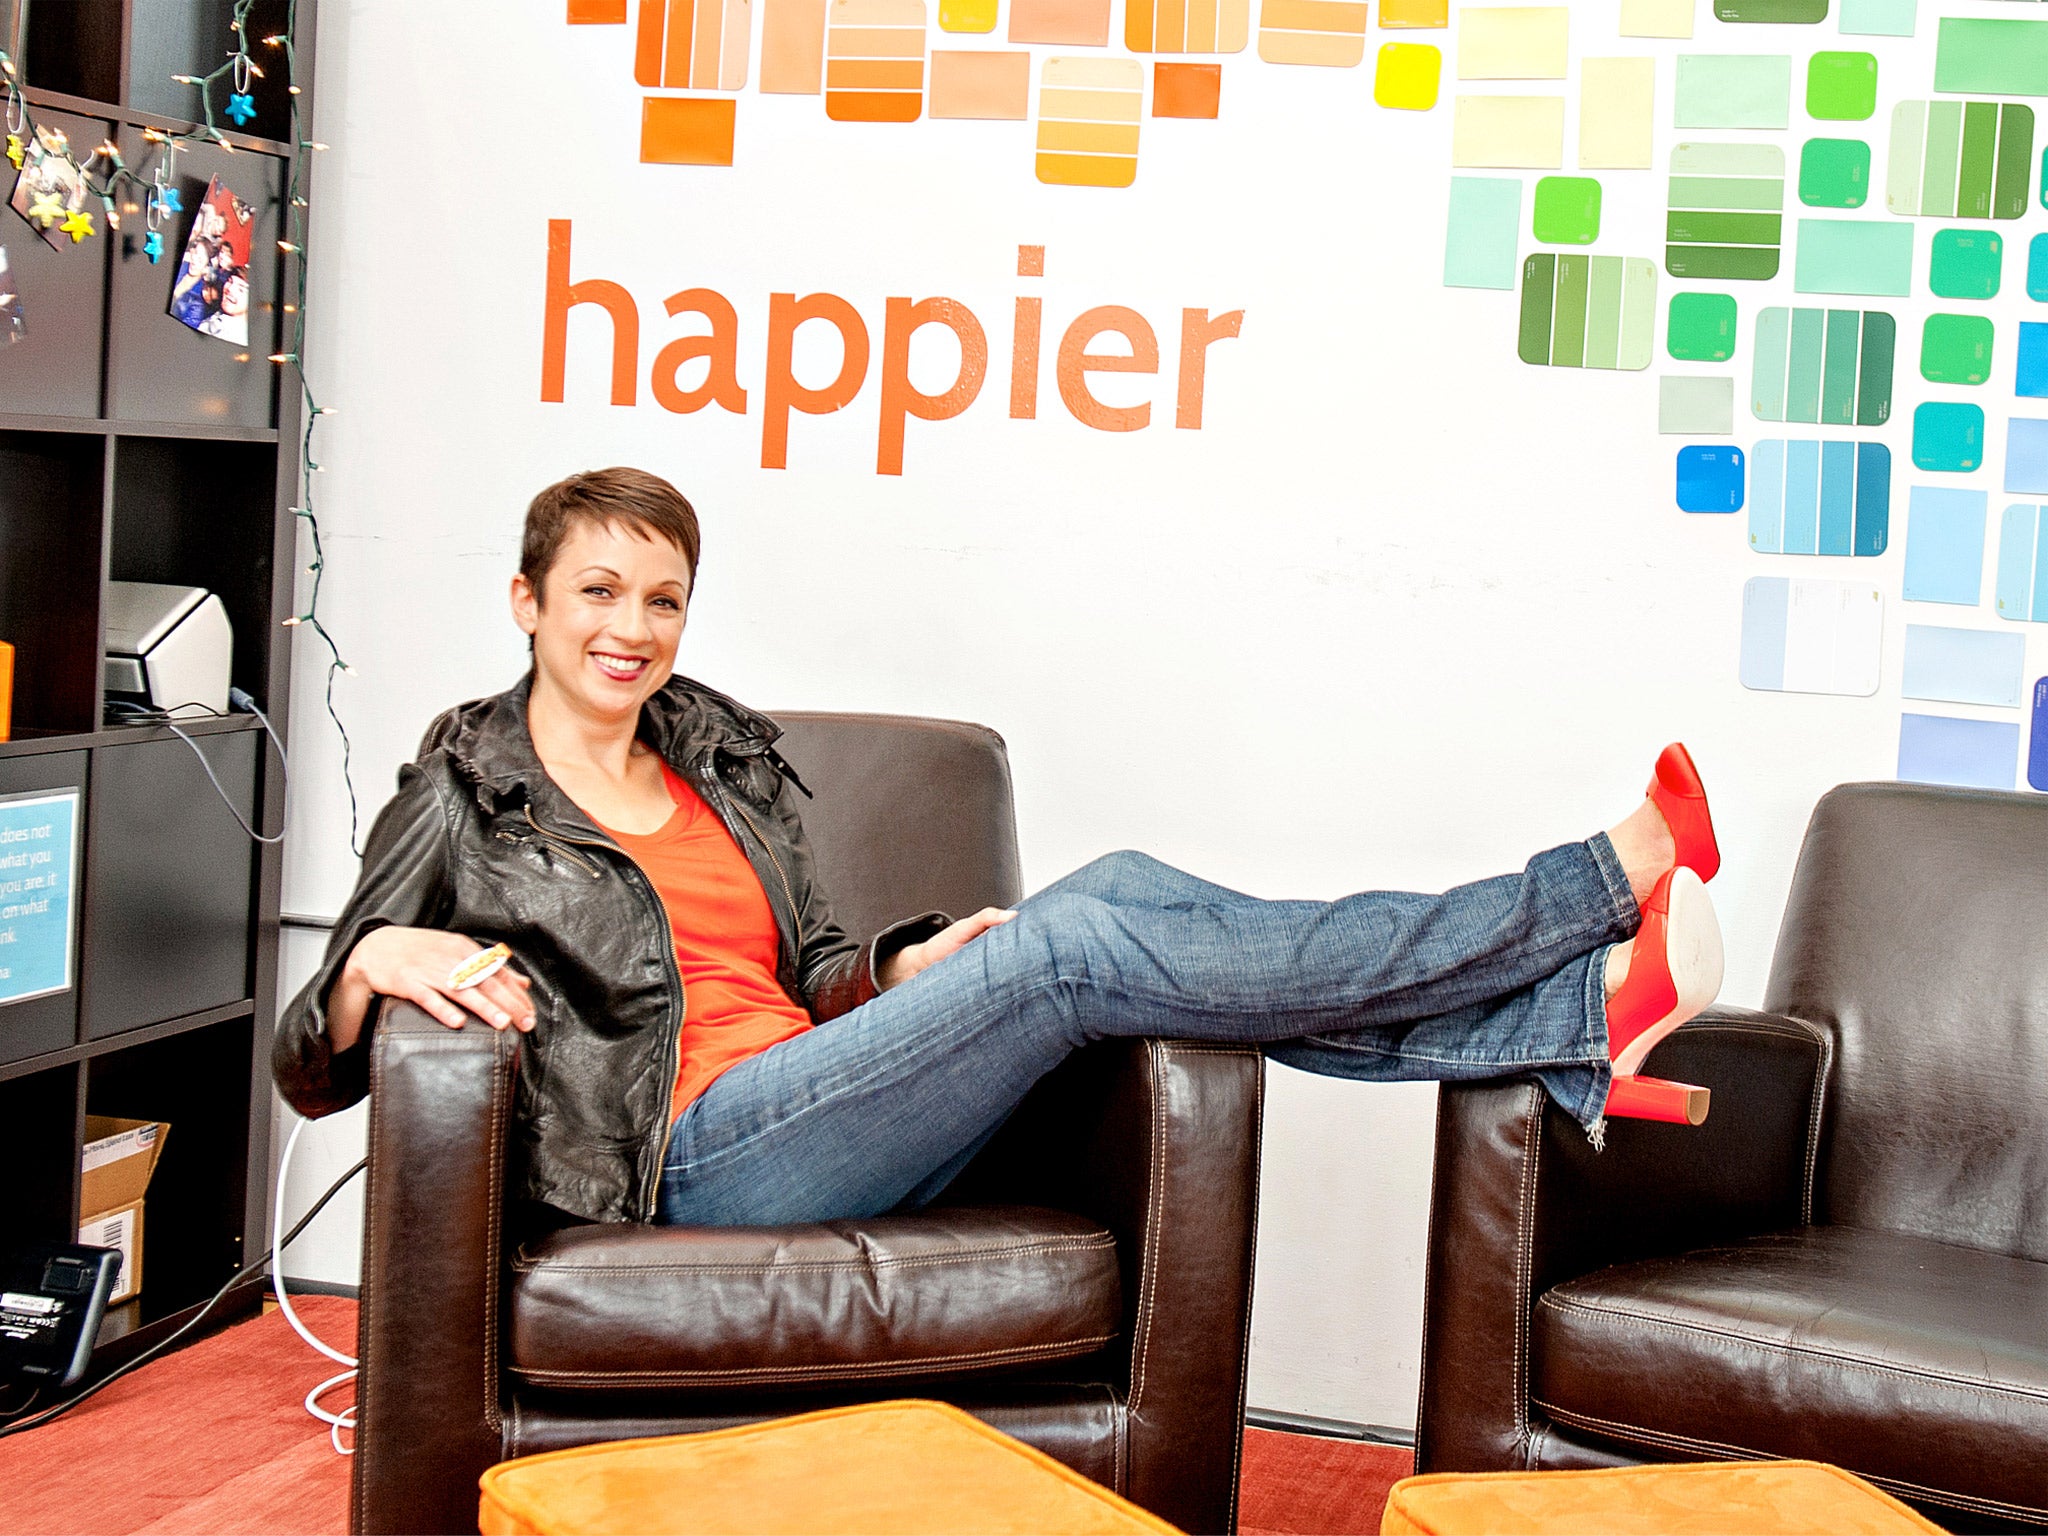 Smiley culture: Nataly Kogan, ‘chief happiness officer’ at Happier.com